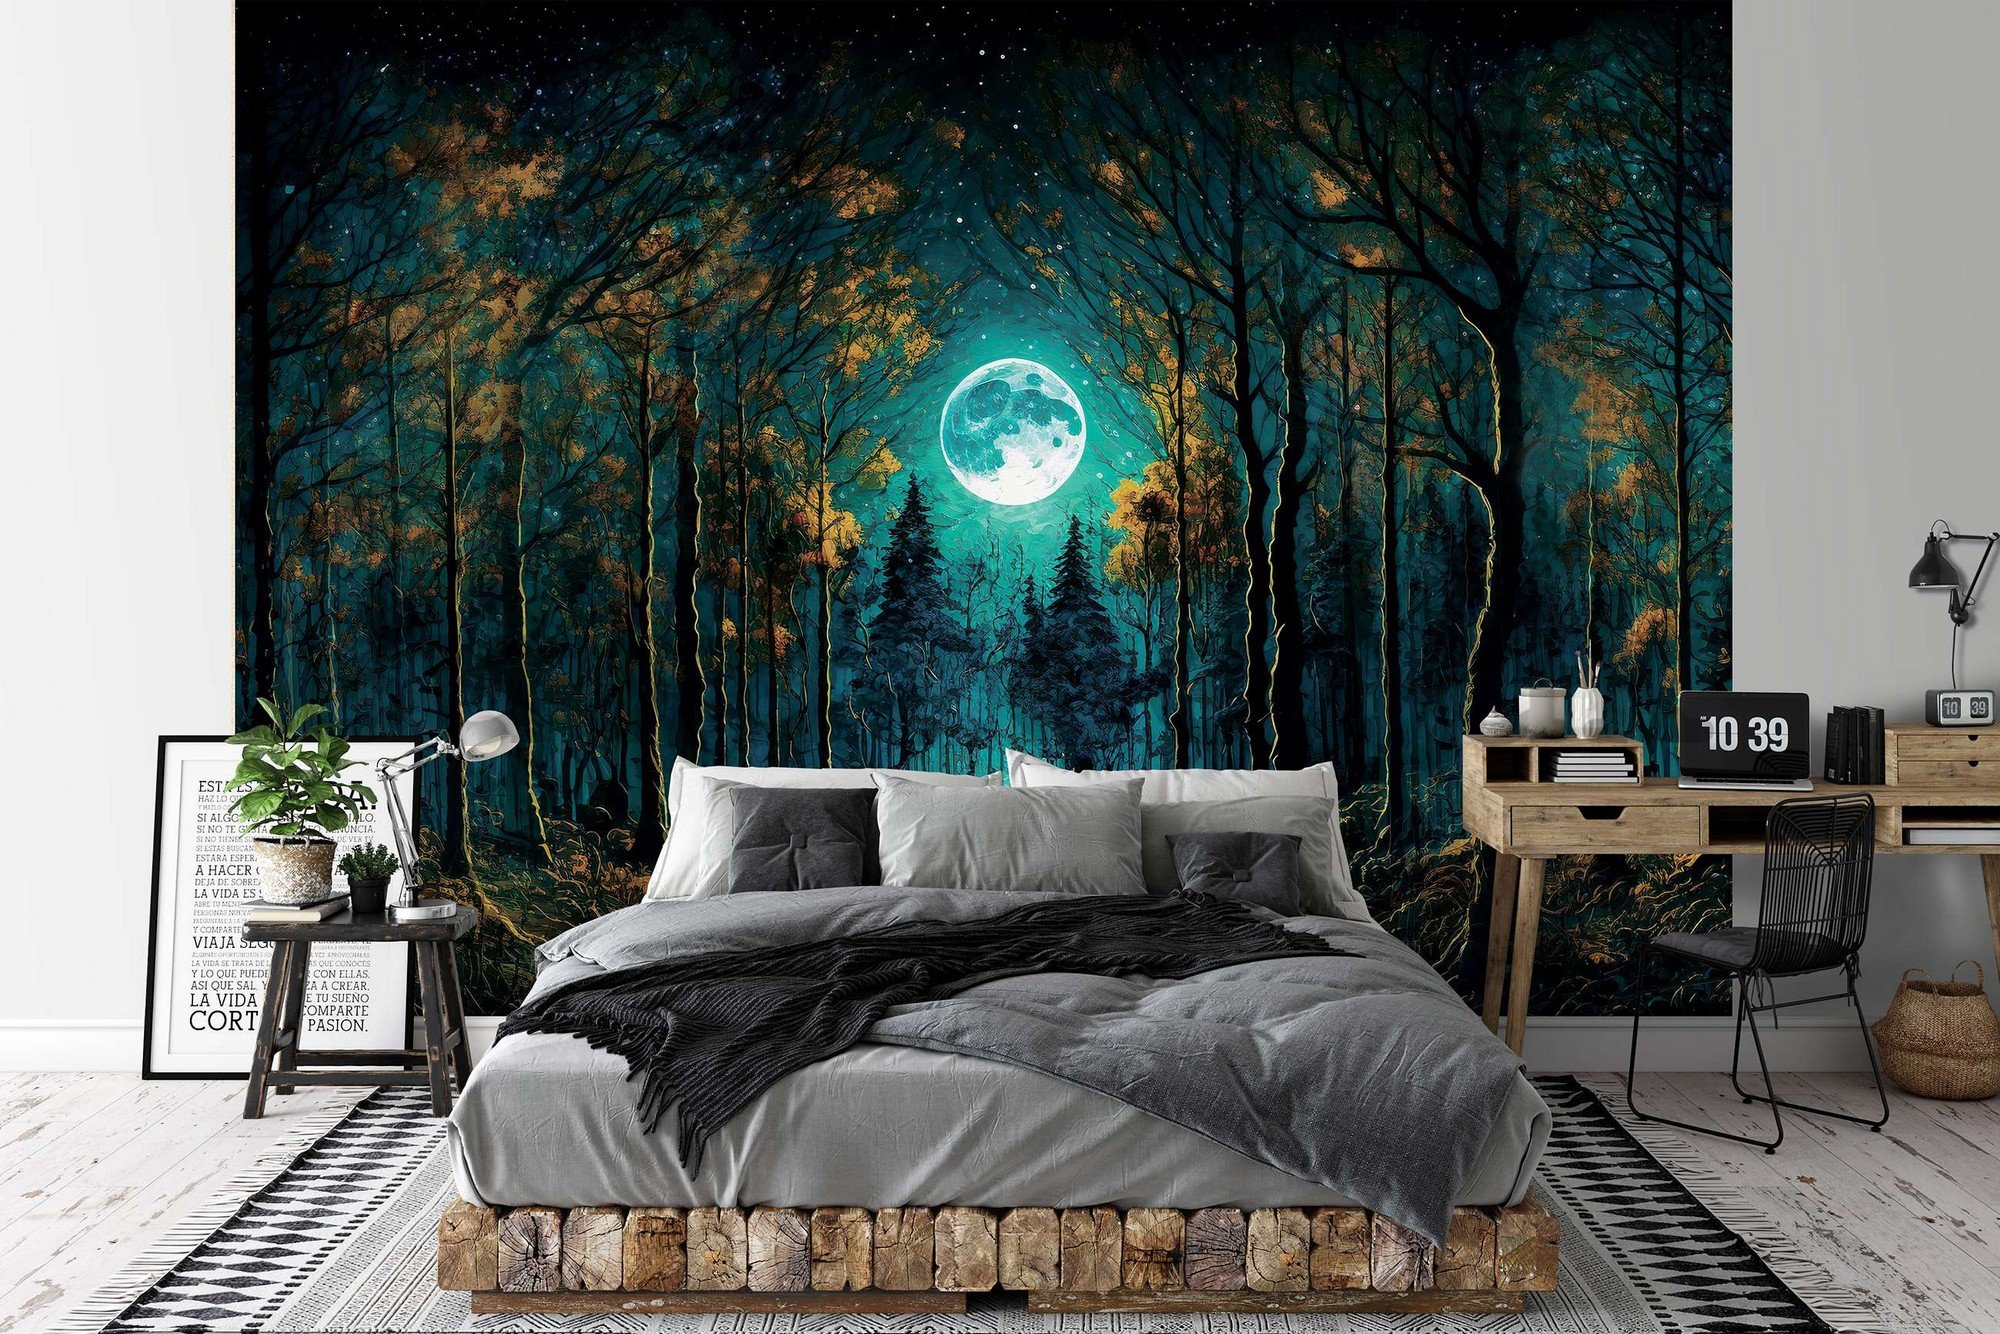 Wall mural vlies: Full moon in the forest - 254x184 cm